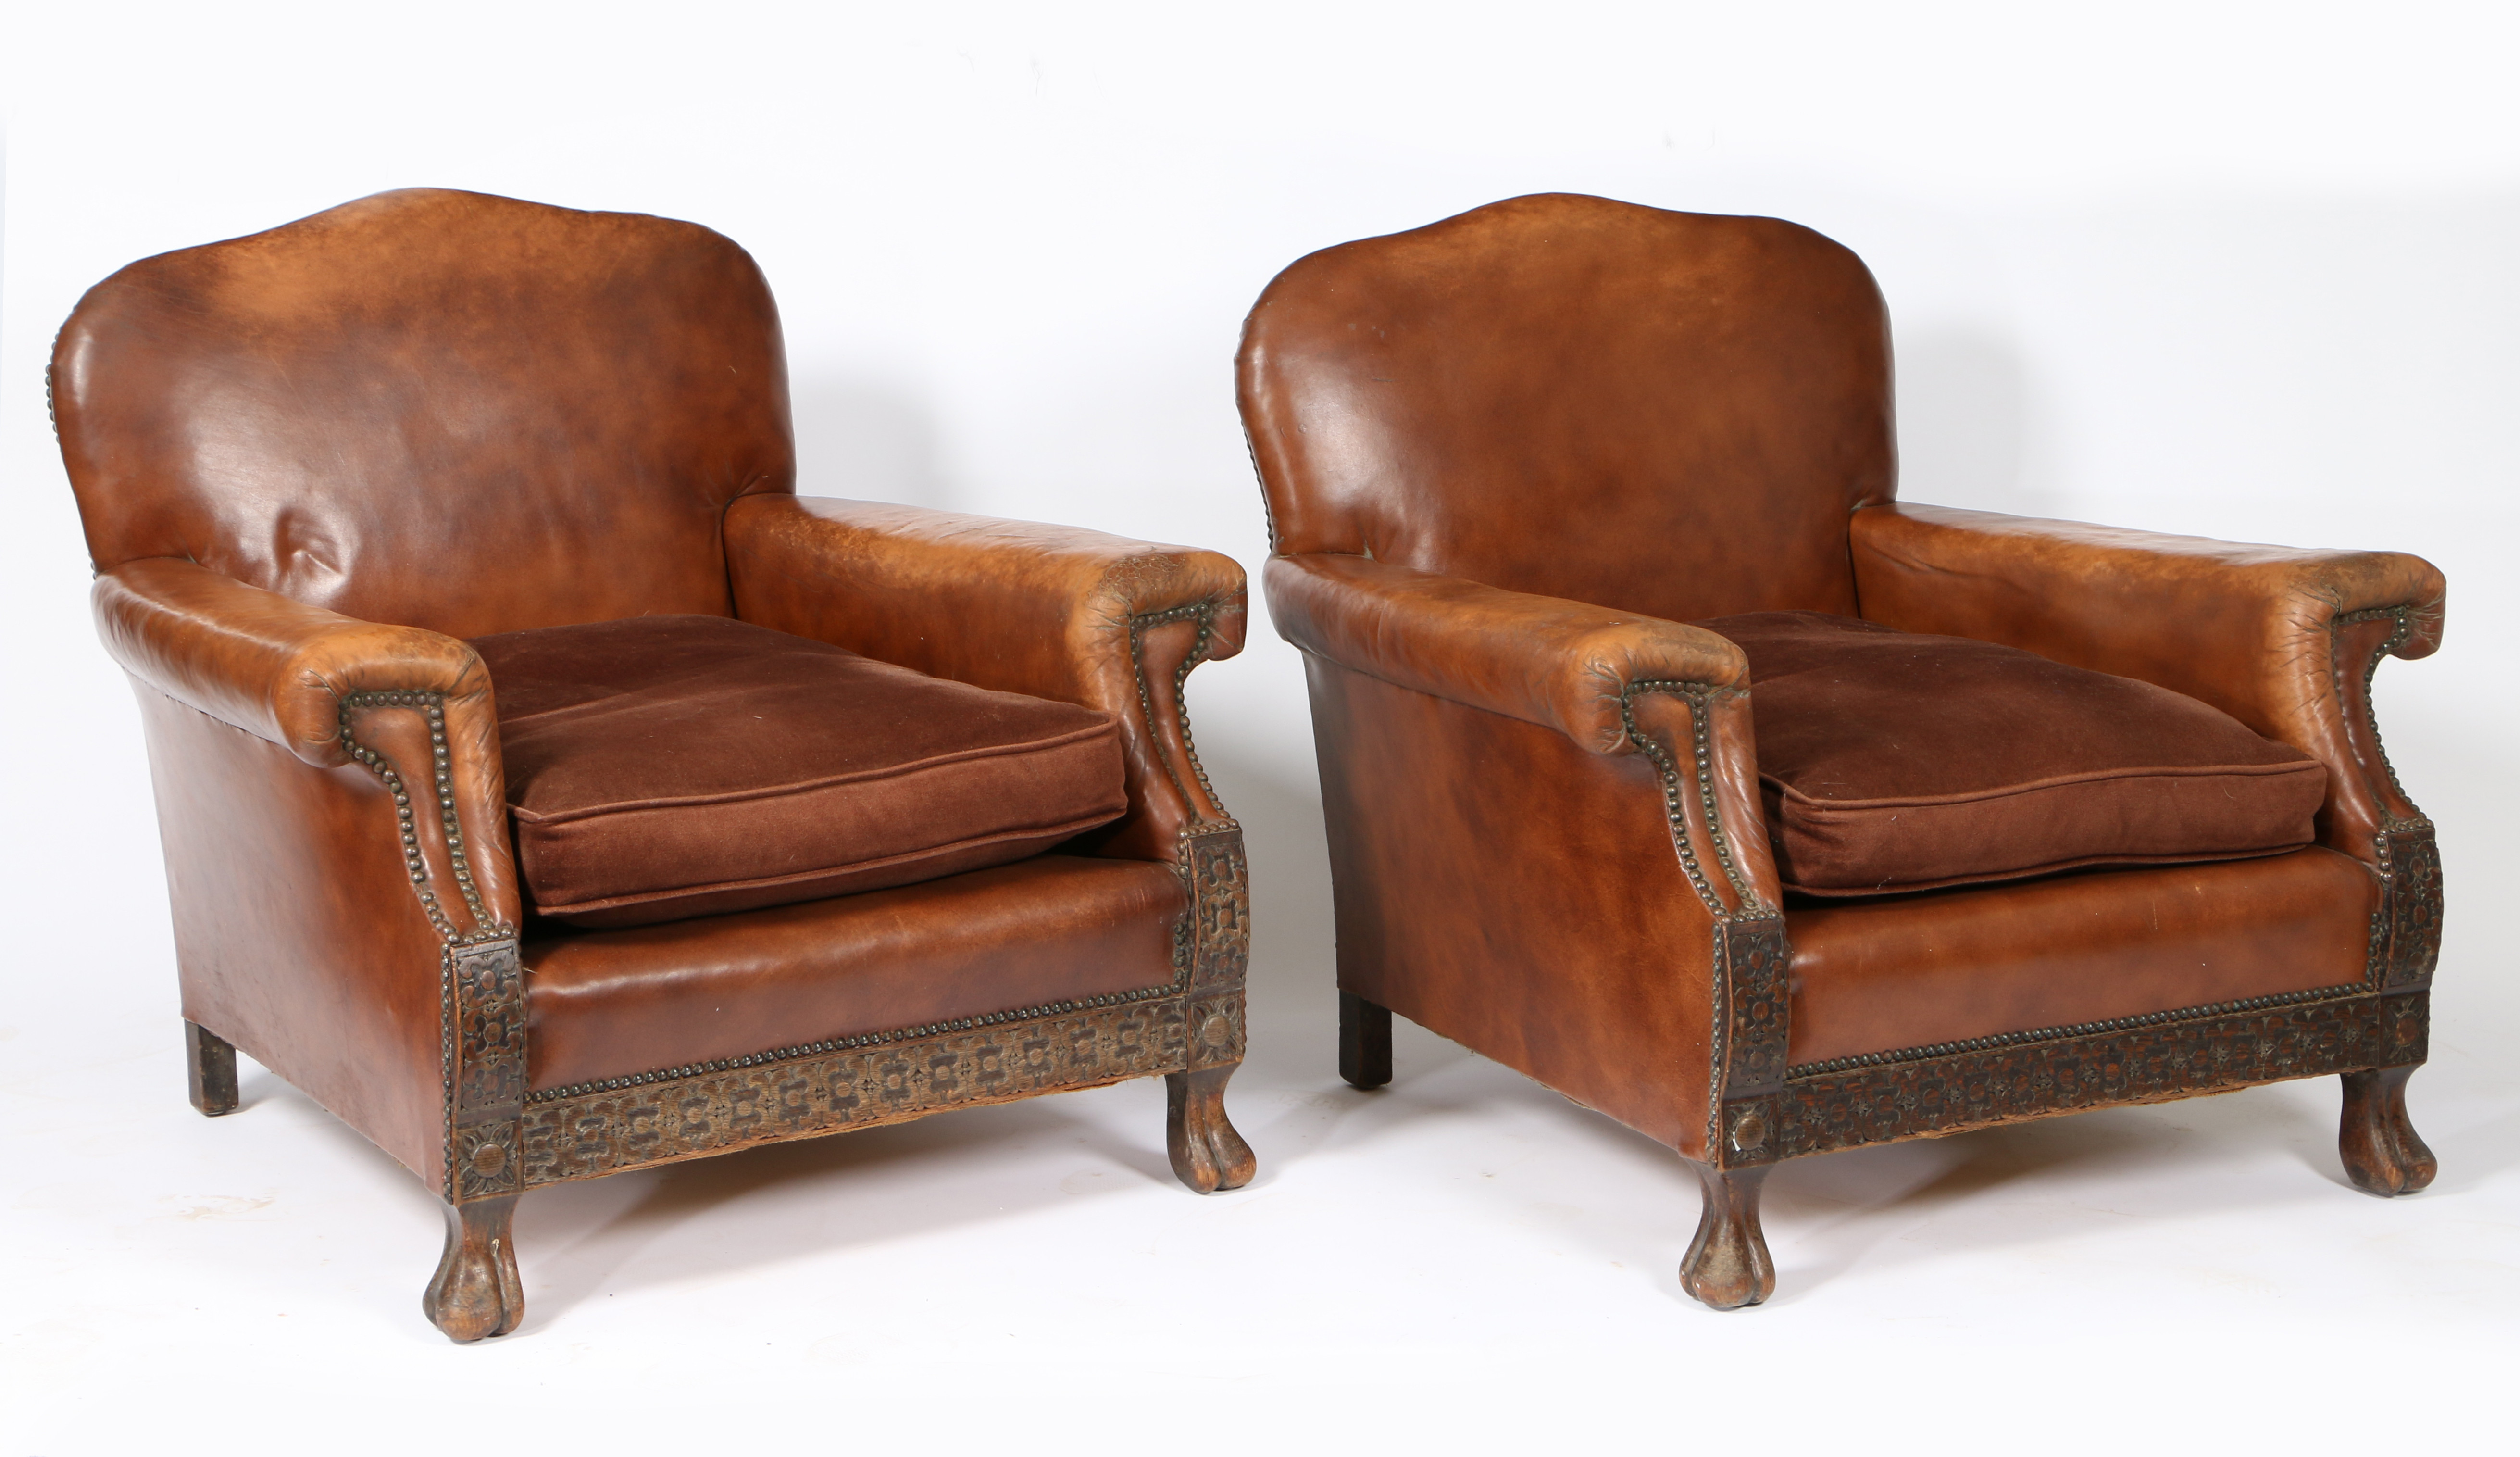 A PAIR OF LEATHER DEEP SEATED ARMCHAIRS. - Image 2 of 2